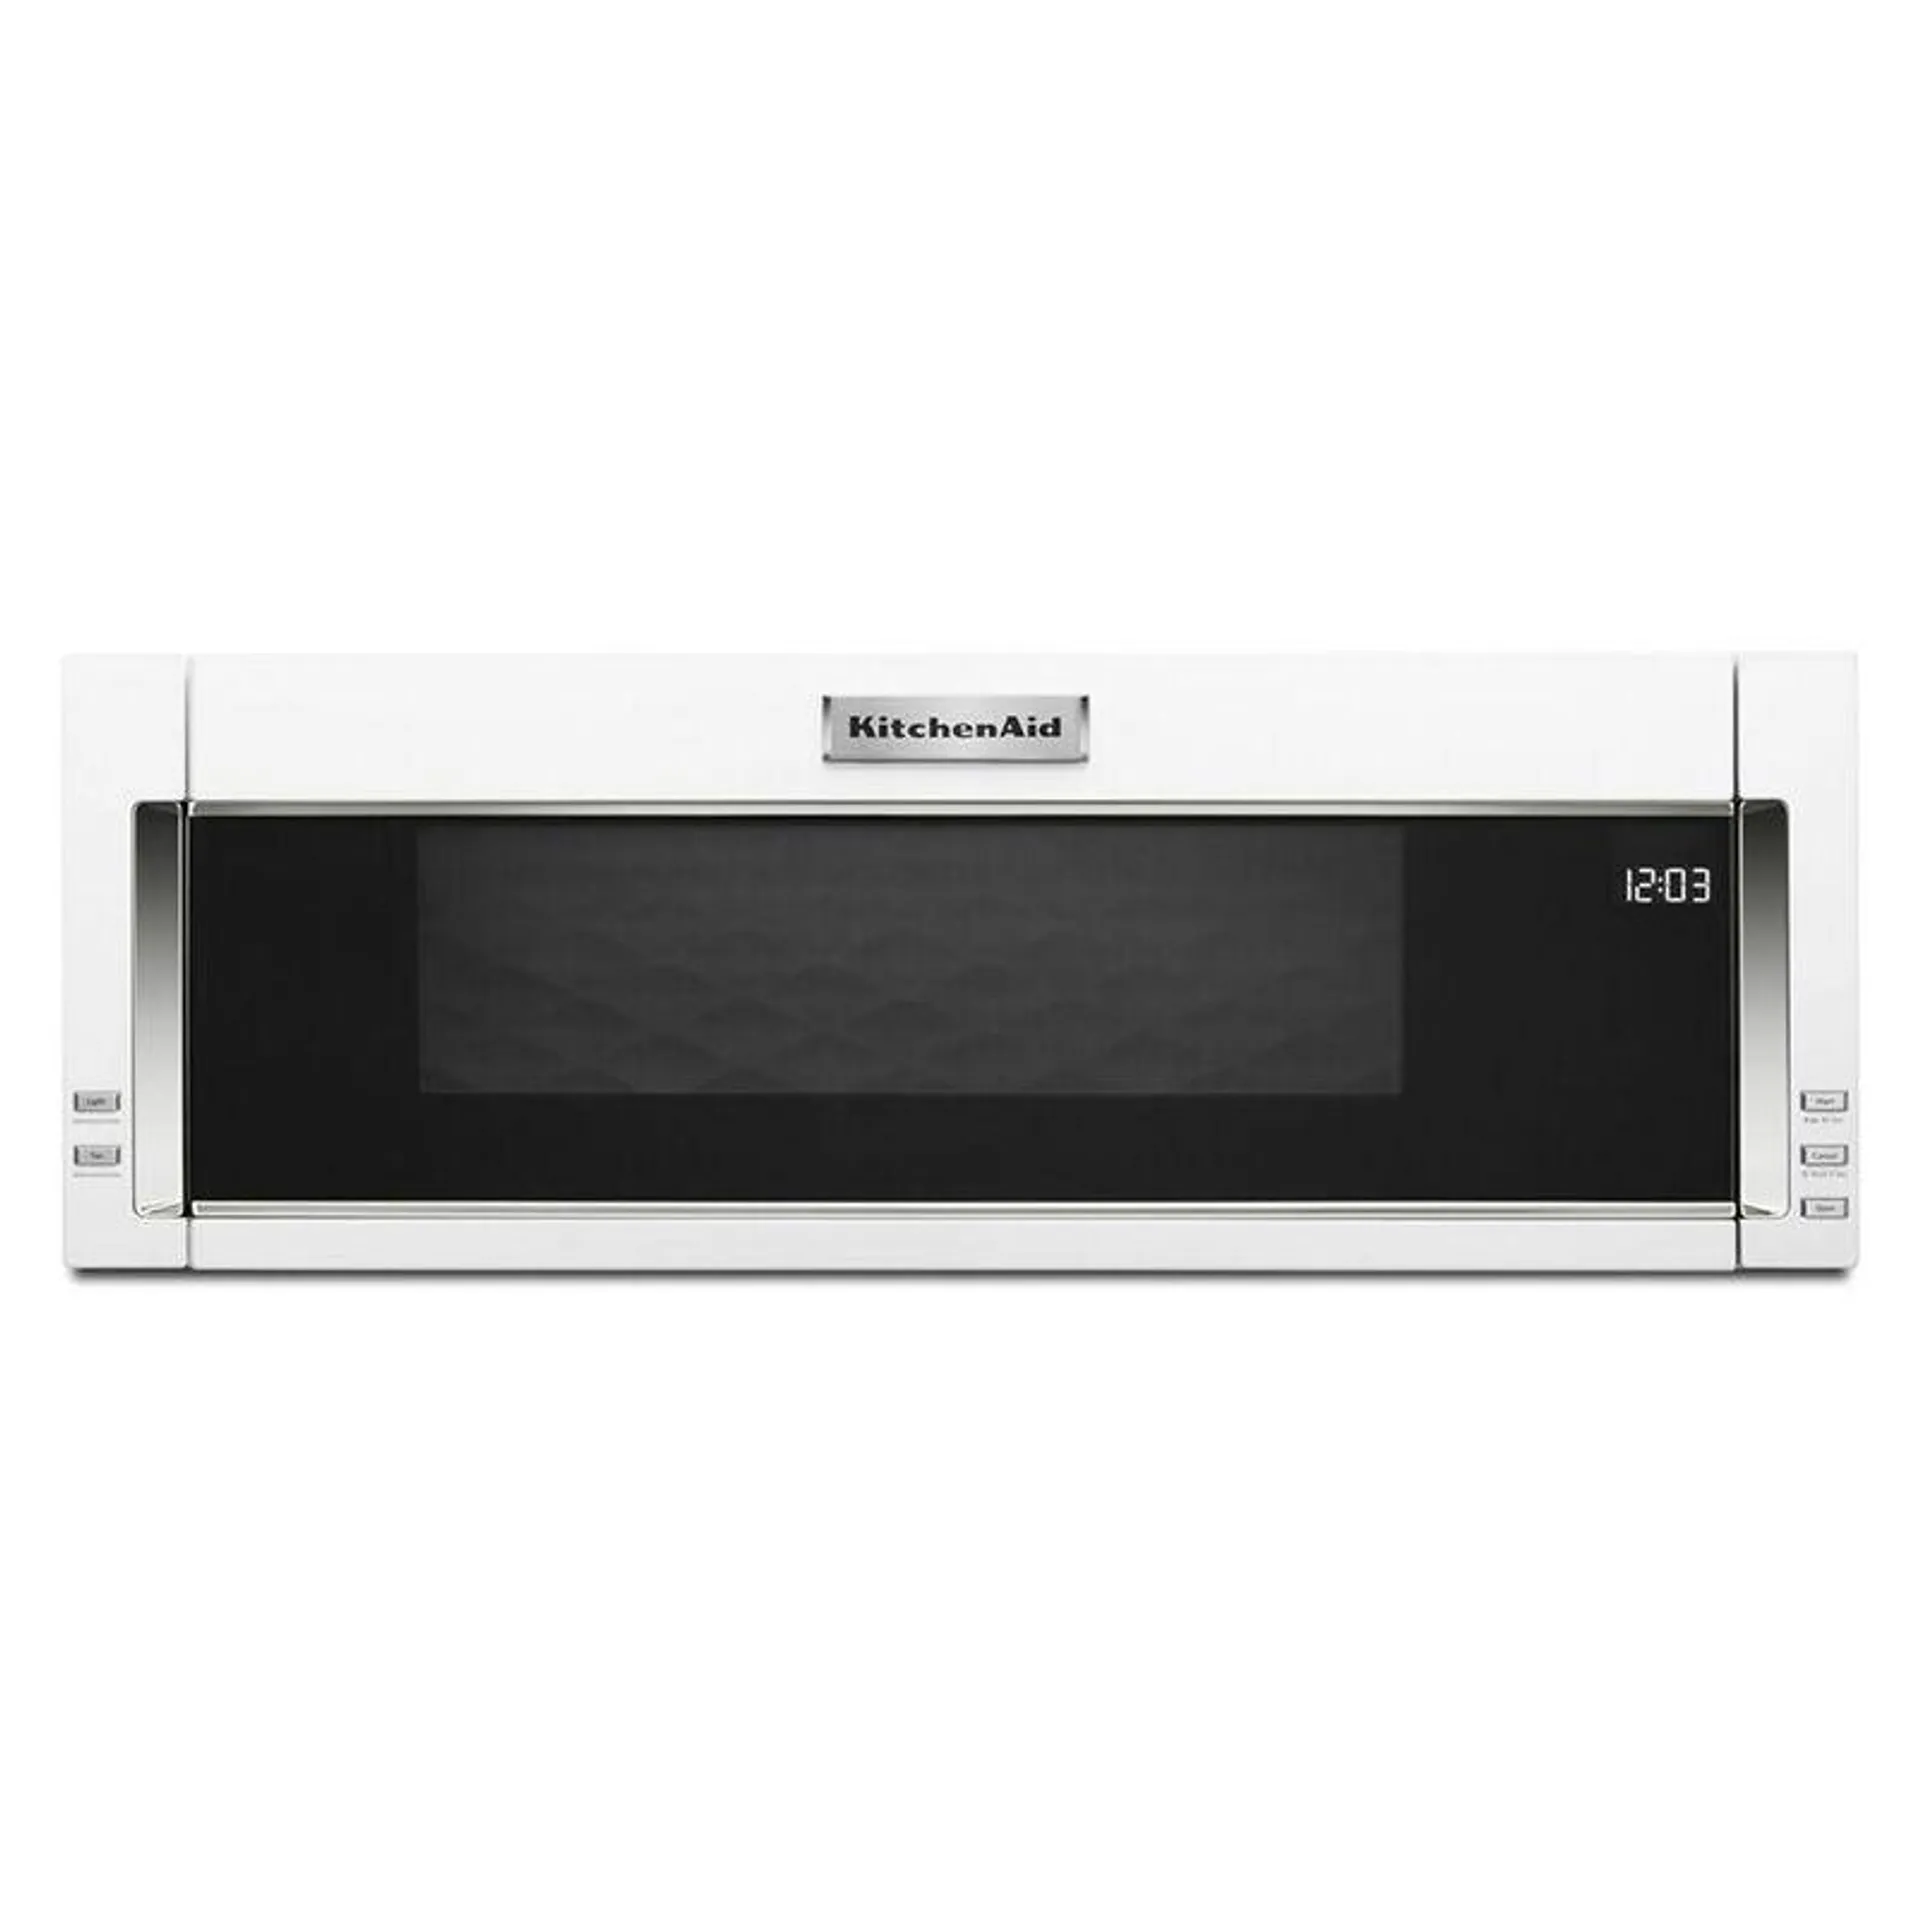 KitchenAid 30" 1.1 Cu. Ft. Over-the-Range Microwave with 10 Power Levels, 500 CFM & Sensor Cooking Controls - White